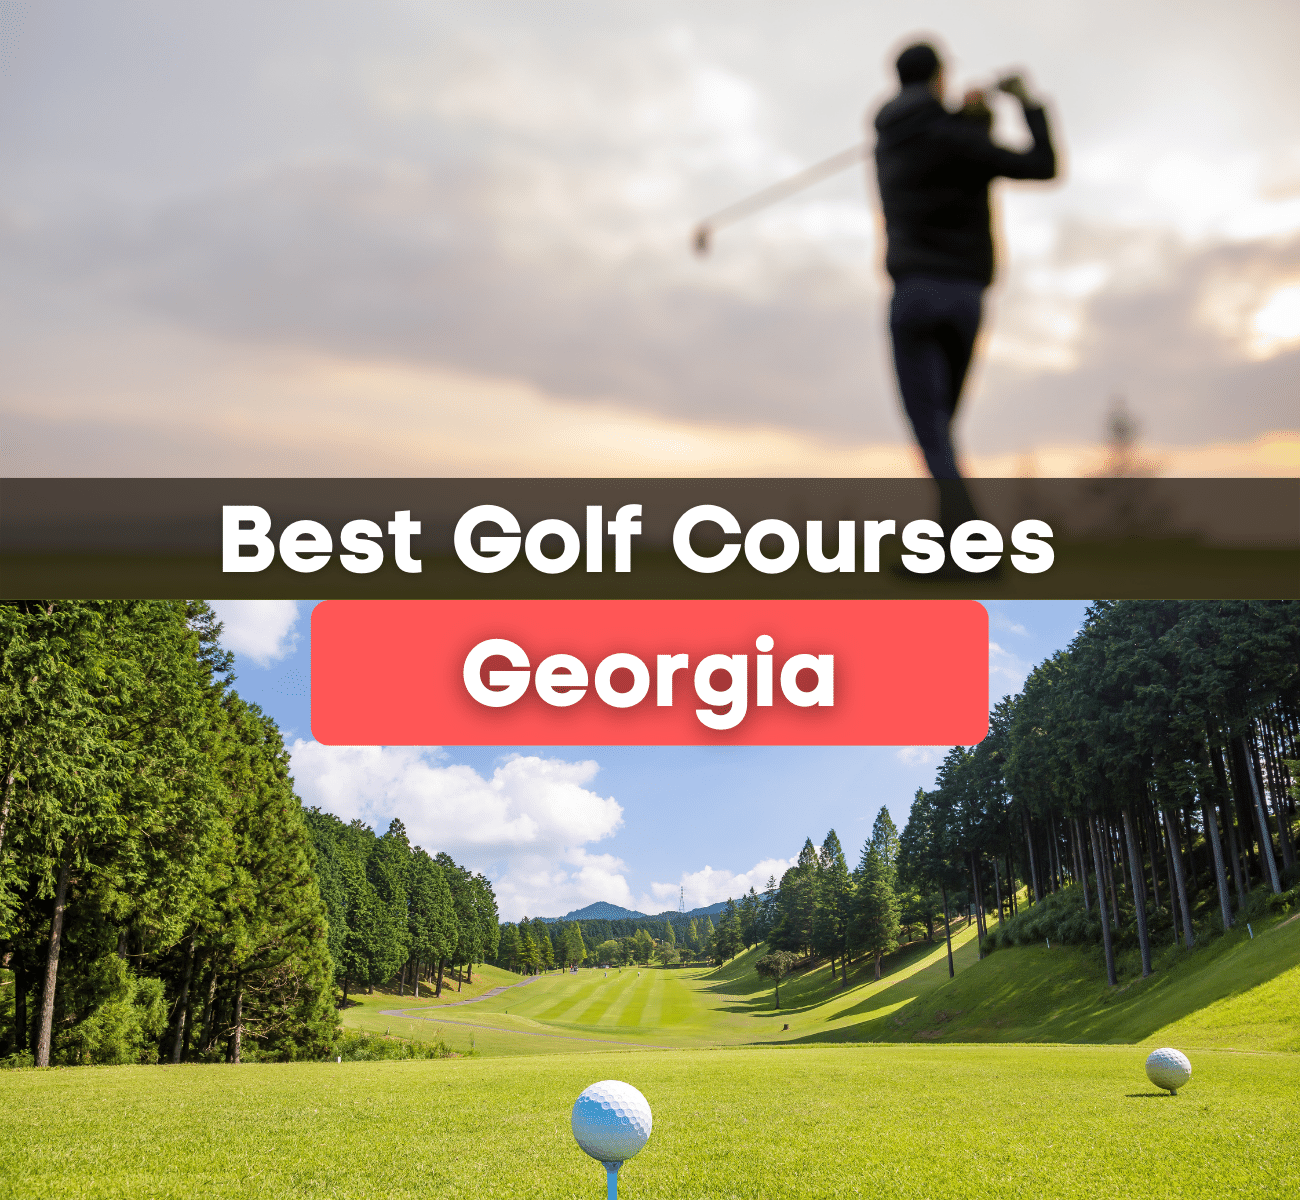 best golf courses in Georgia - golf course and hitting golf ball